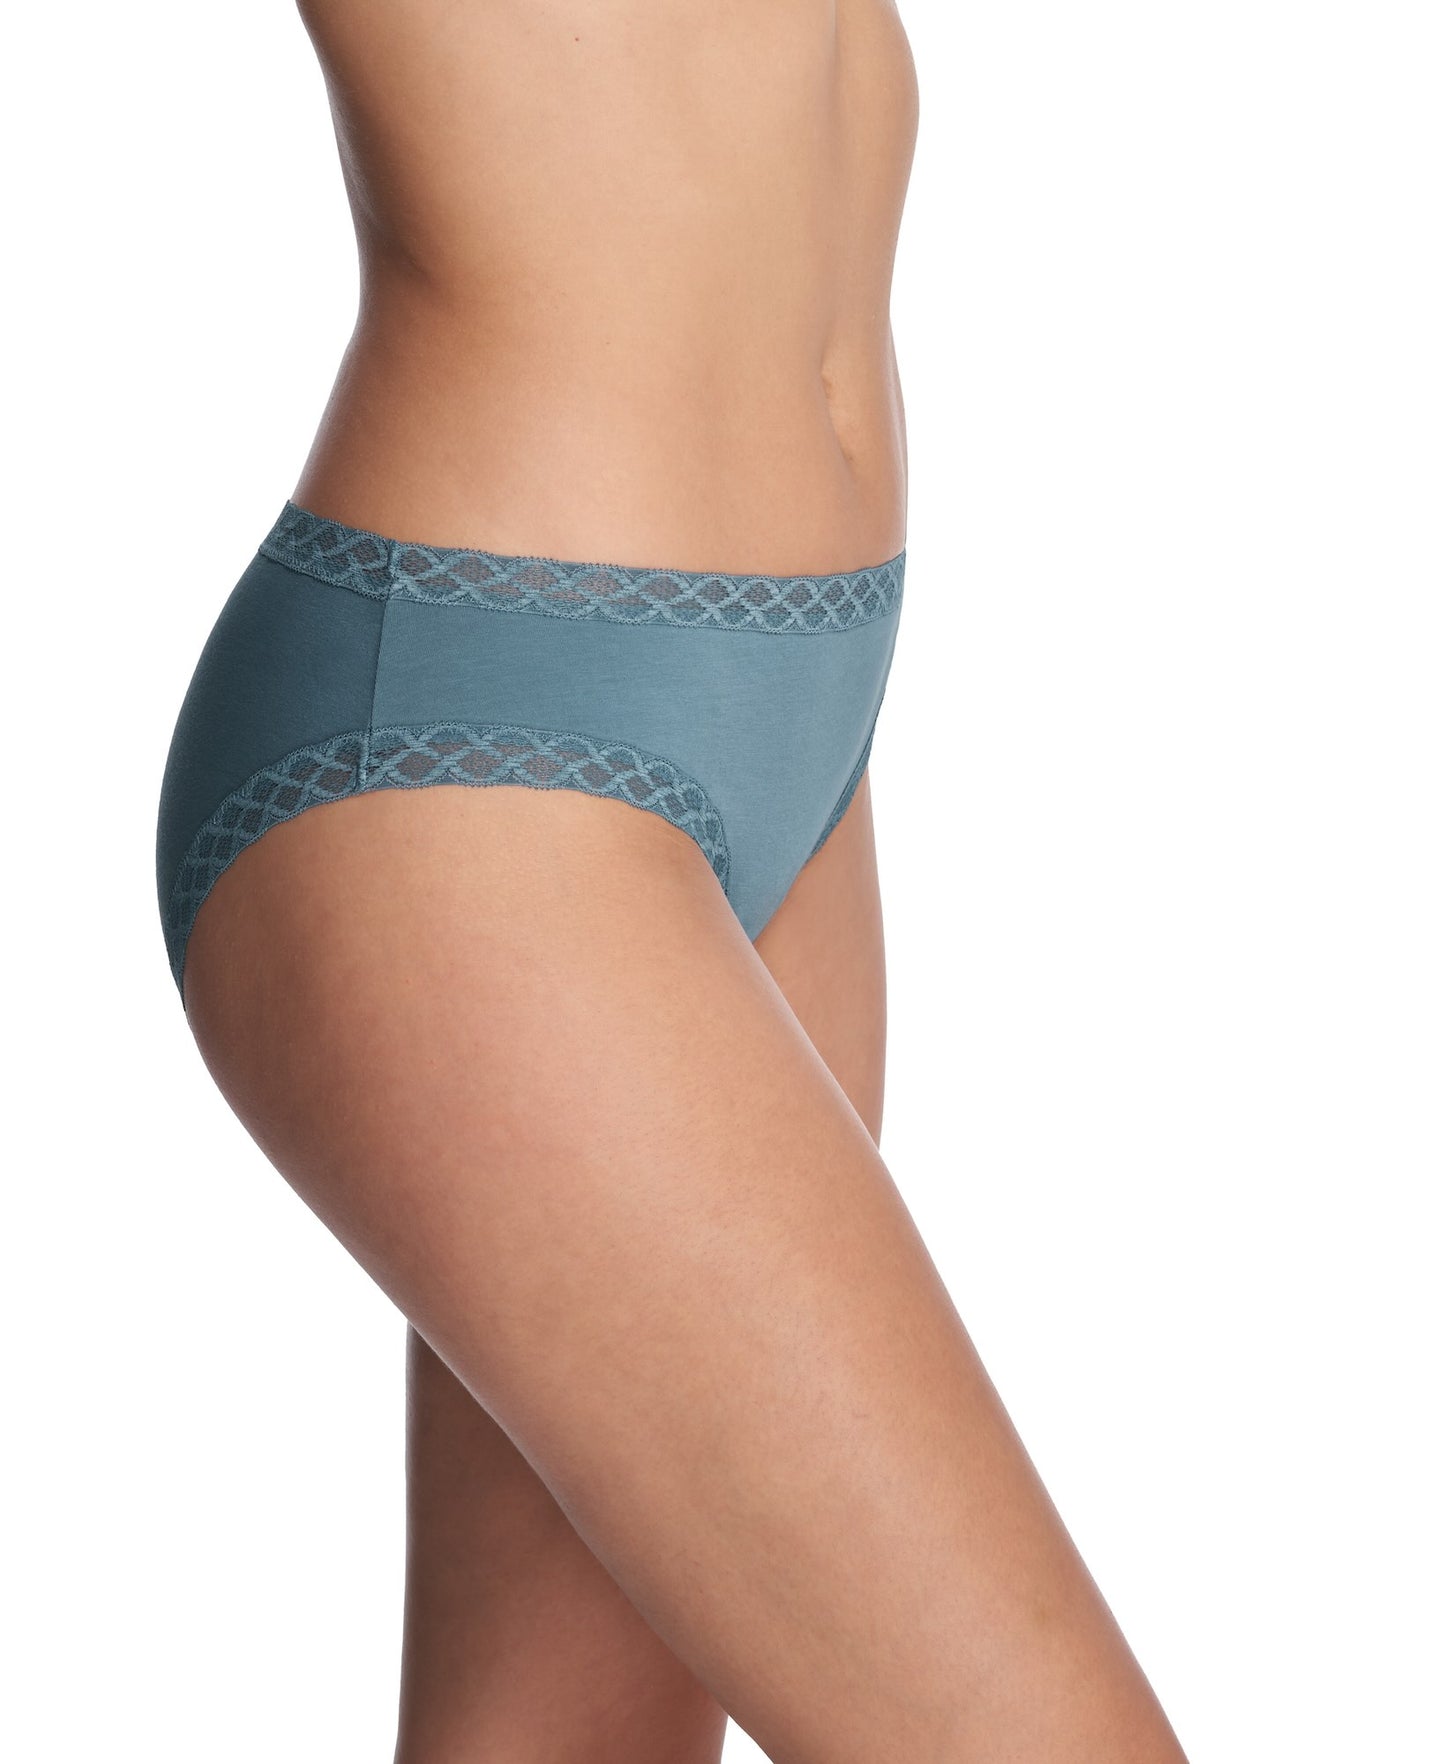 Bliss Girl brief - new winter color